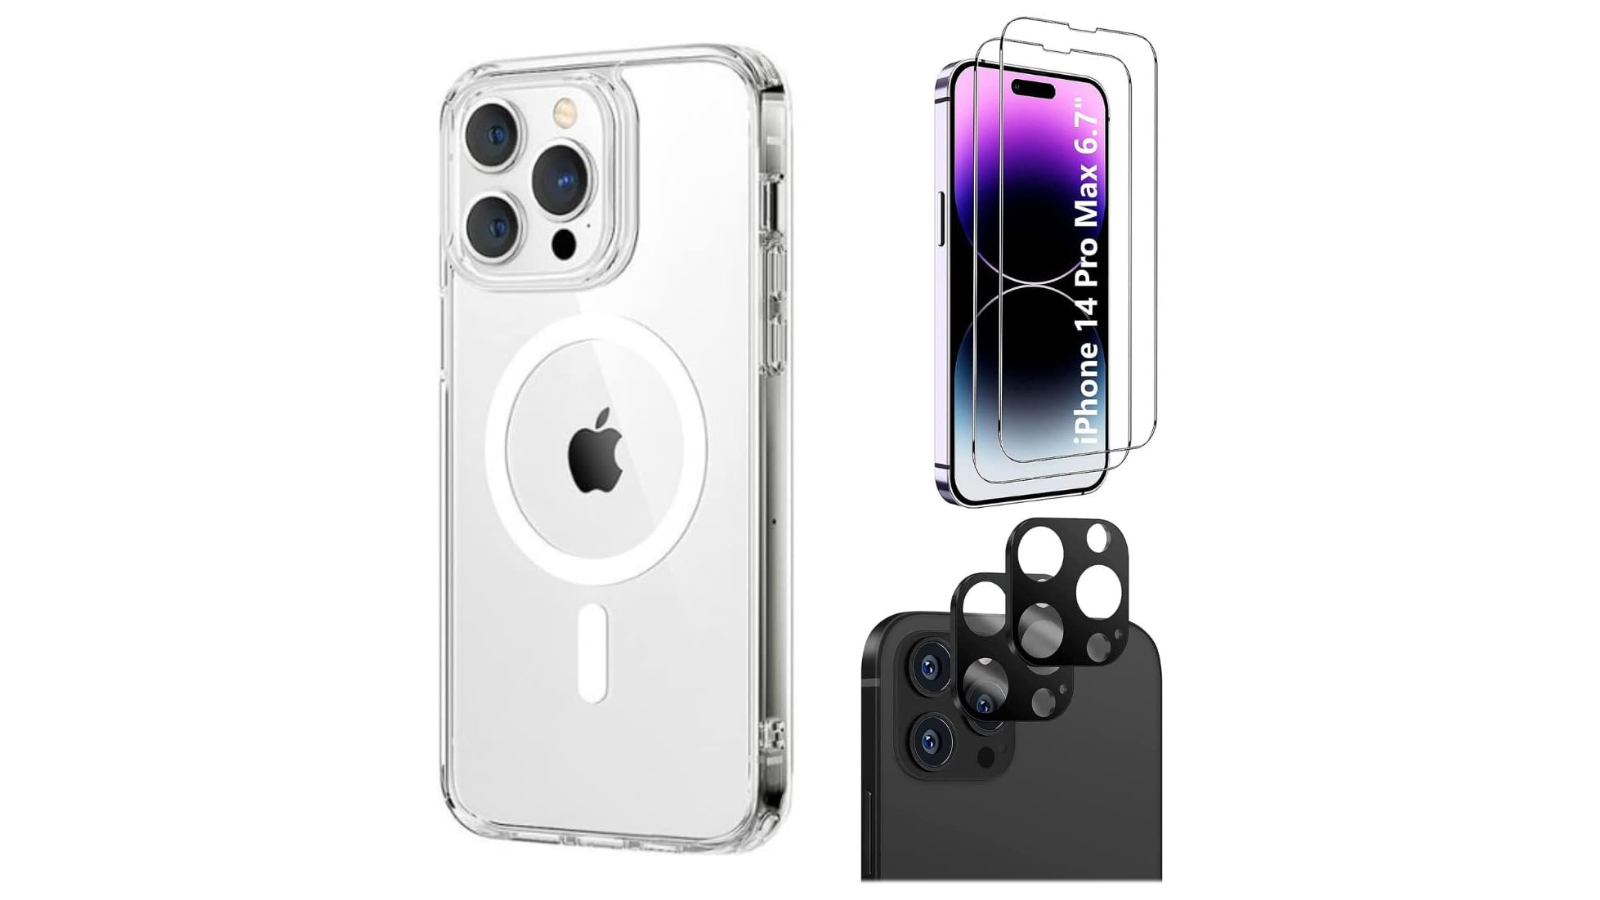 SaharaCase iPhone 14 Pro Max 6.7-inch Protection Kit Bundle - Hybrid-Flex Hard Shell Case with Tempered Glass Screen and Camera Protector - Clear